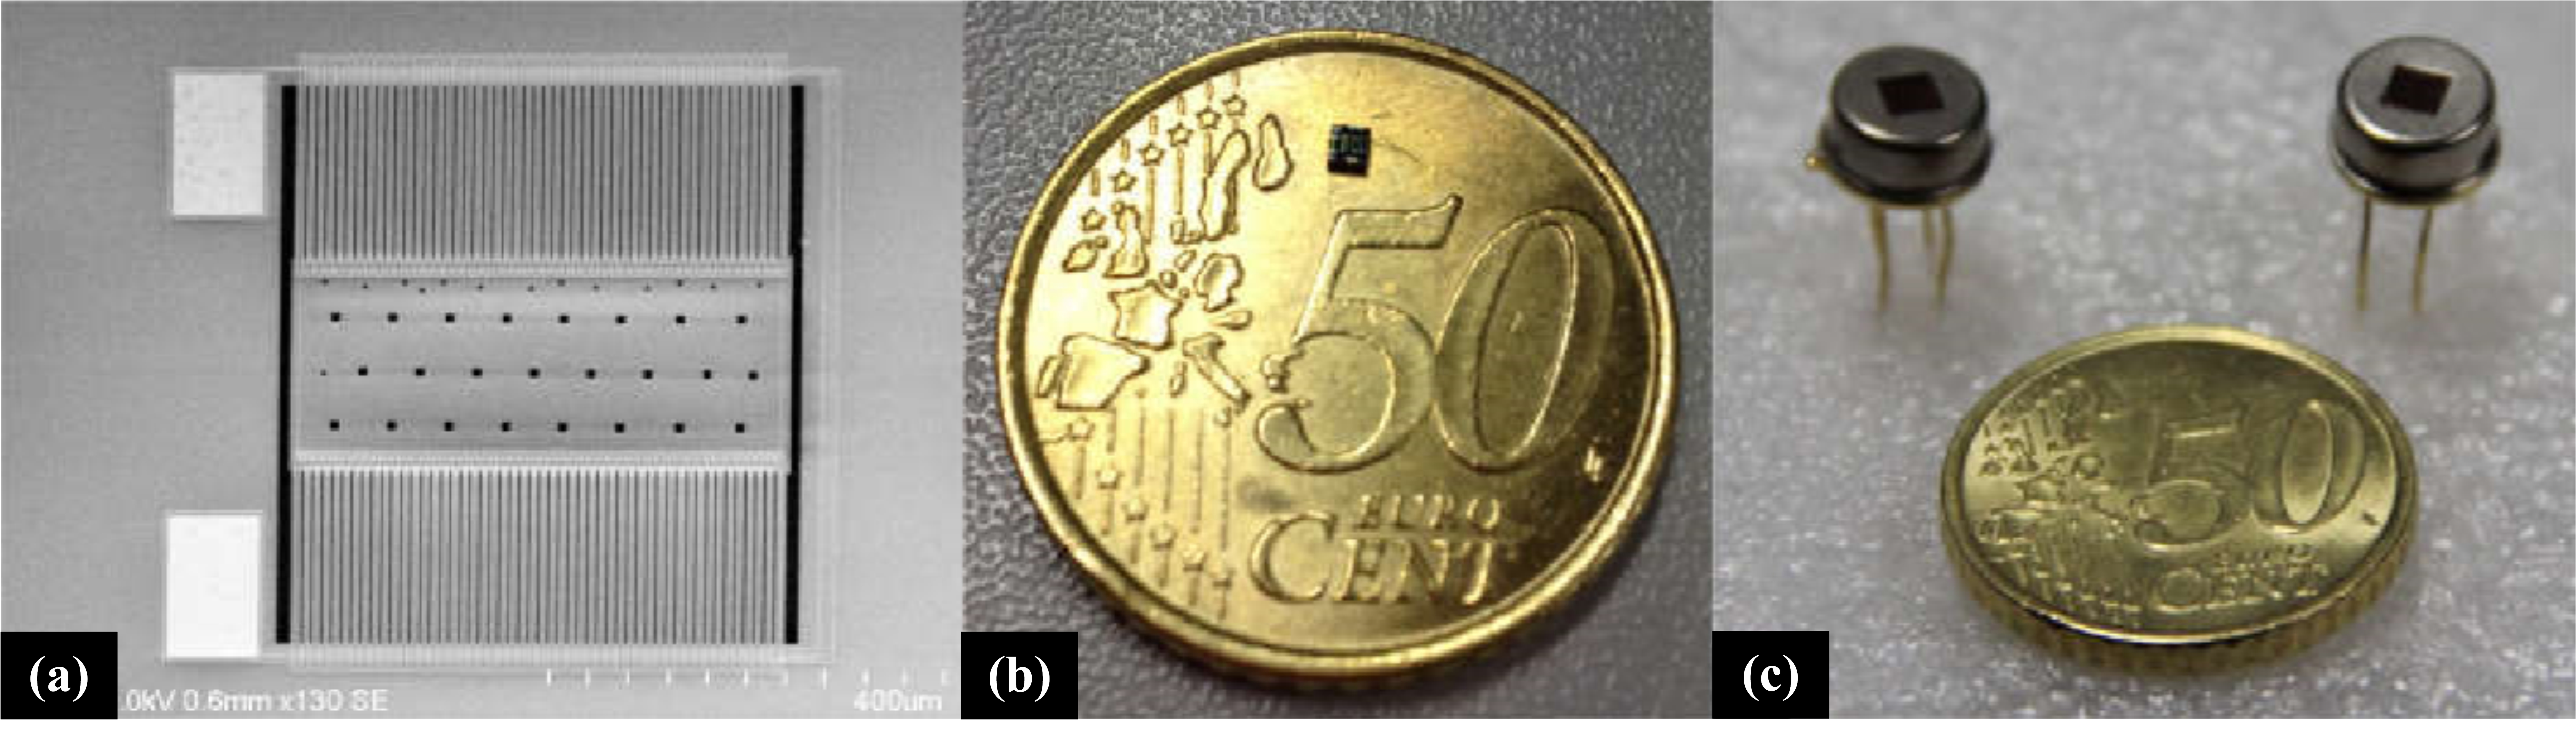 MEMS thermopile IR detector：(a) SEM image of chip; (b)Bare chip; (c)Packaged detector